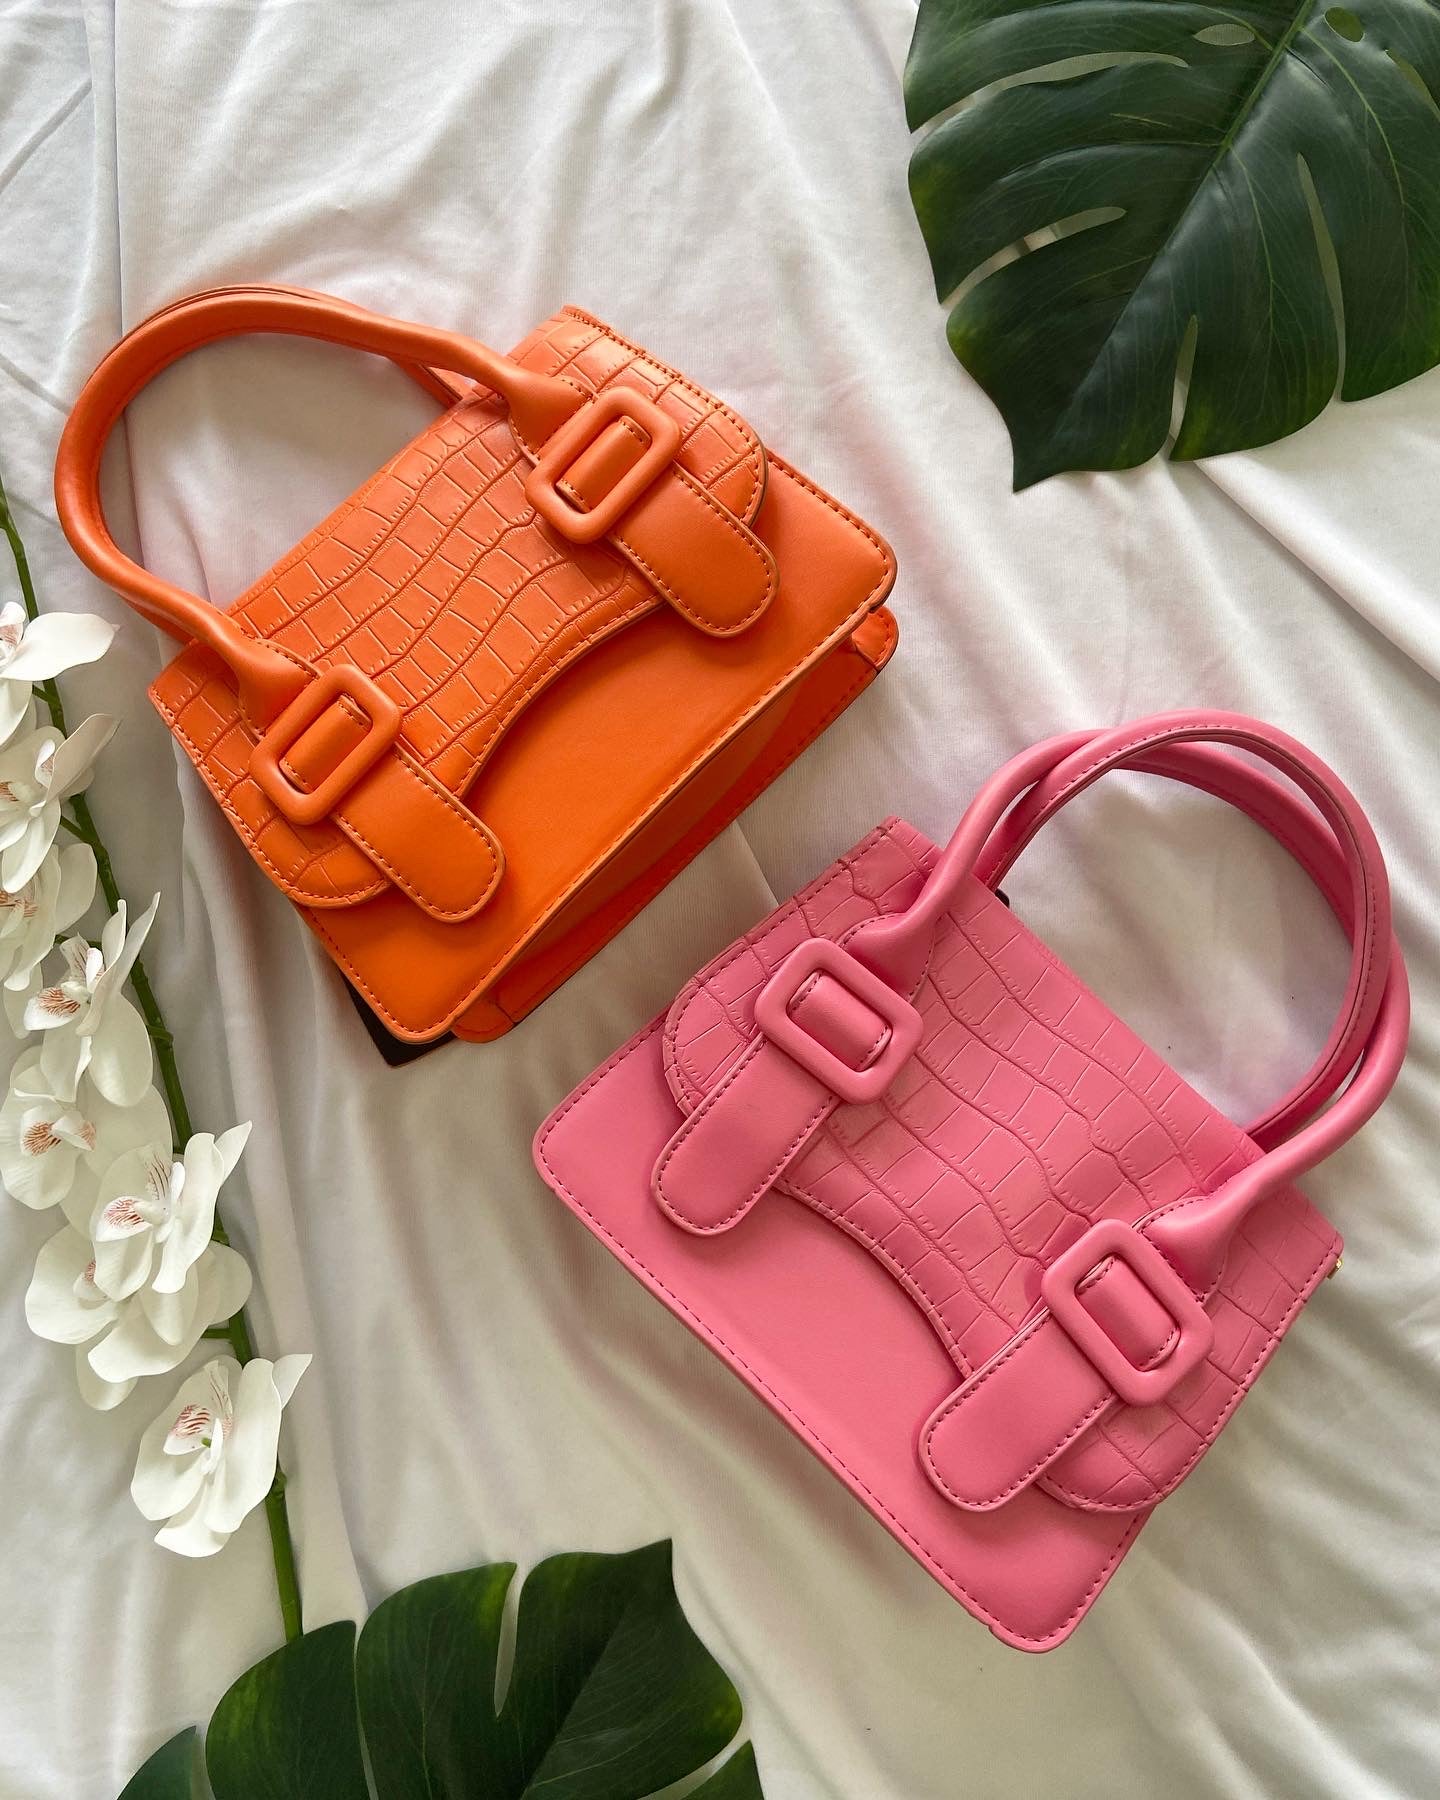 Candy structured bags